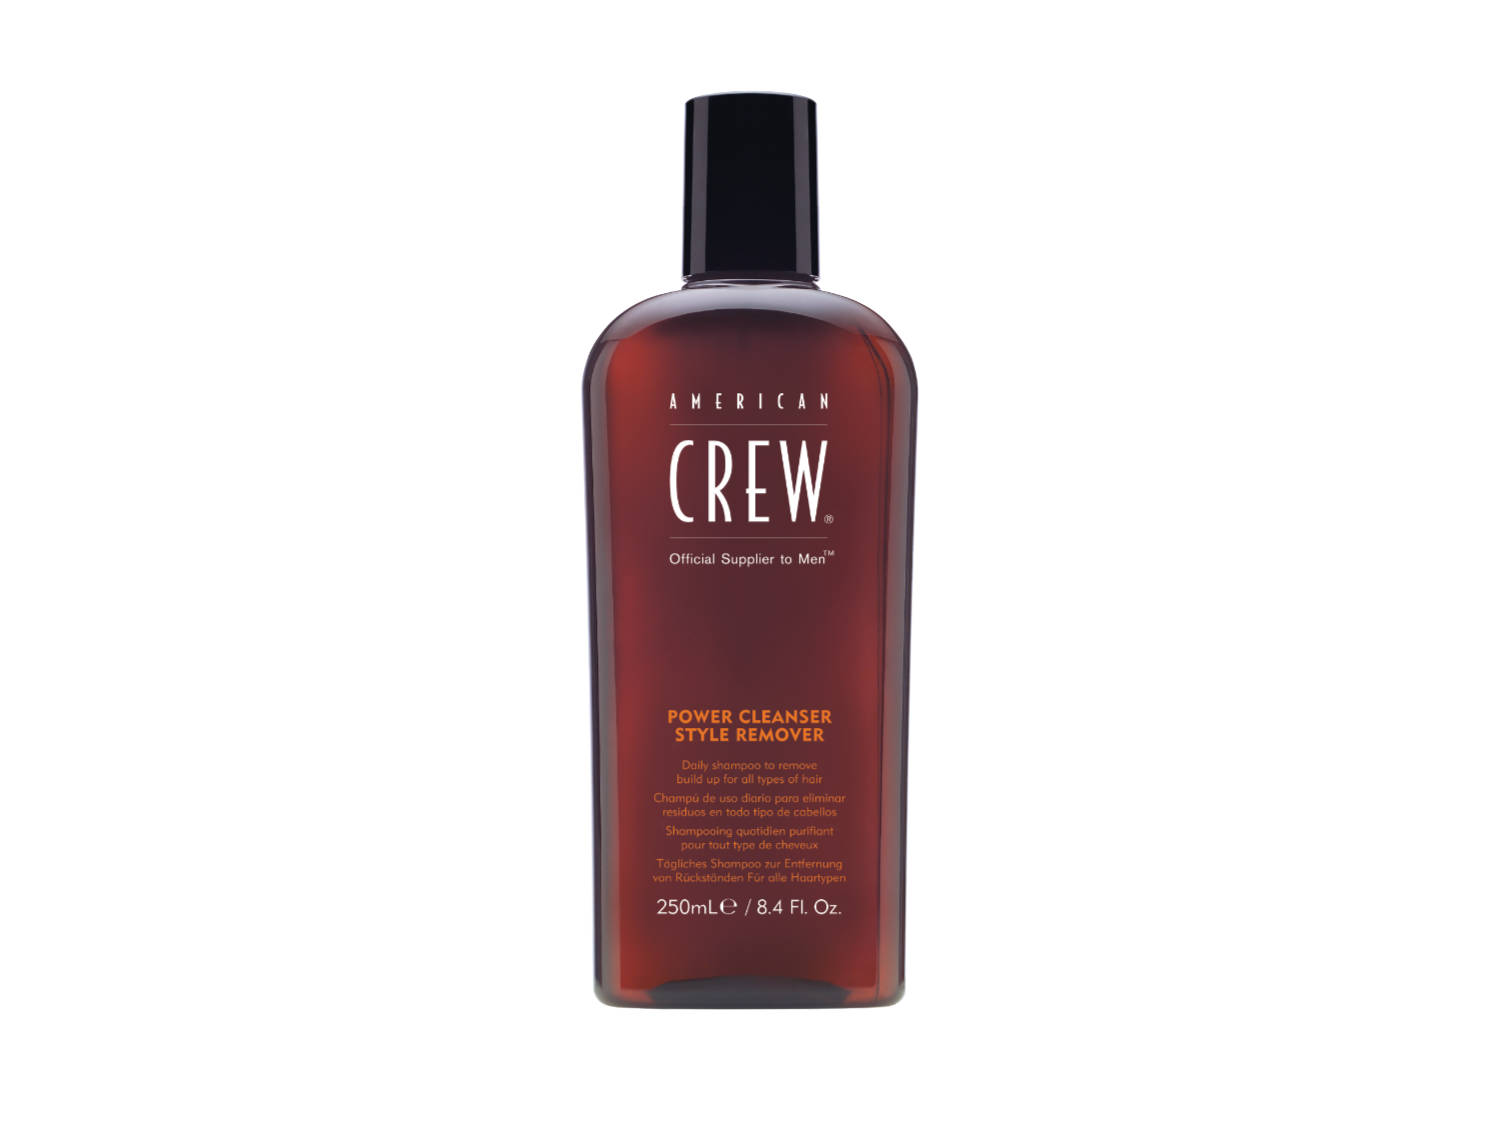 Arma Beauty - American Crew - Power Cleanser Style Remover